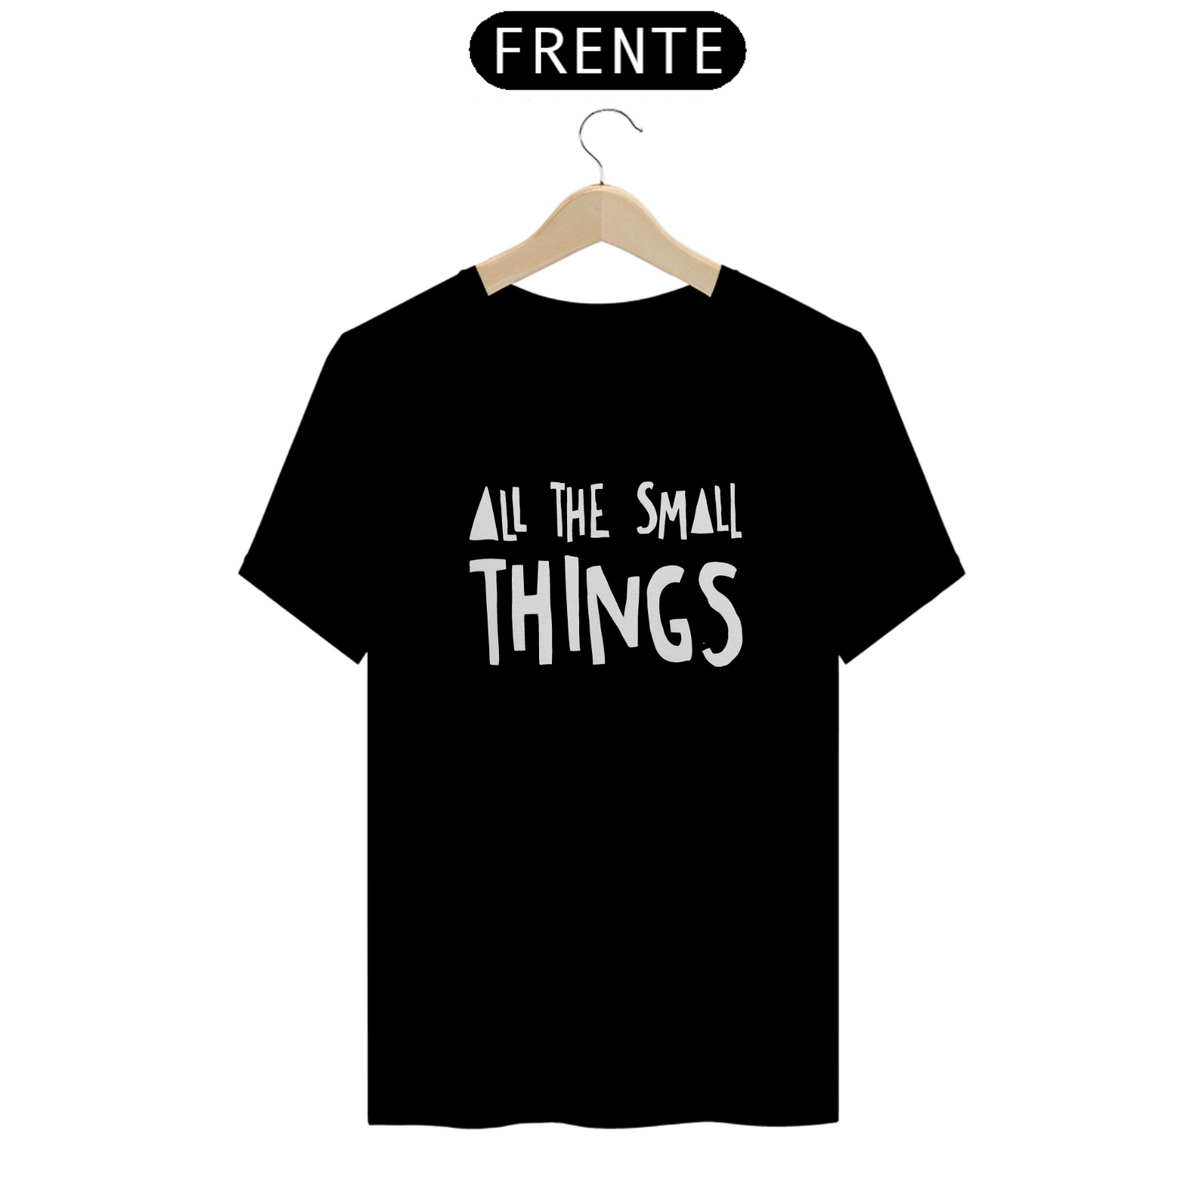 Nome do produto: Camiseta Unissex - Blink 182 All The Small Things